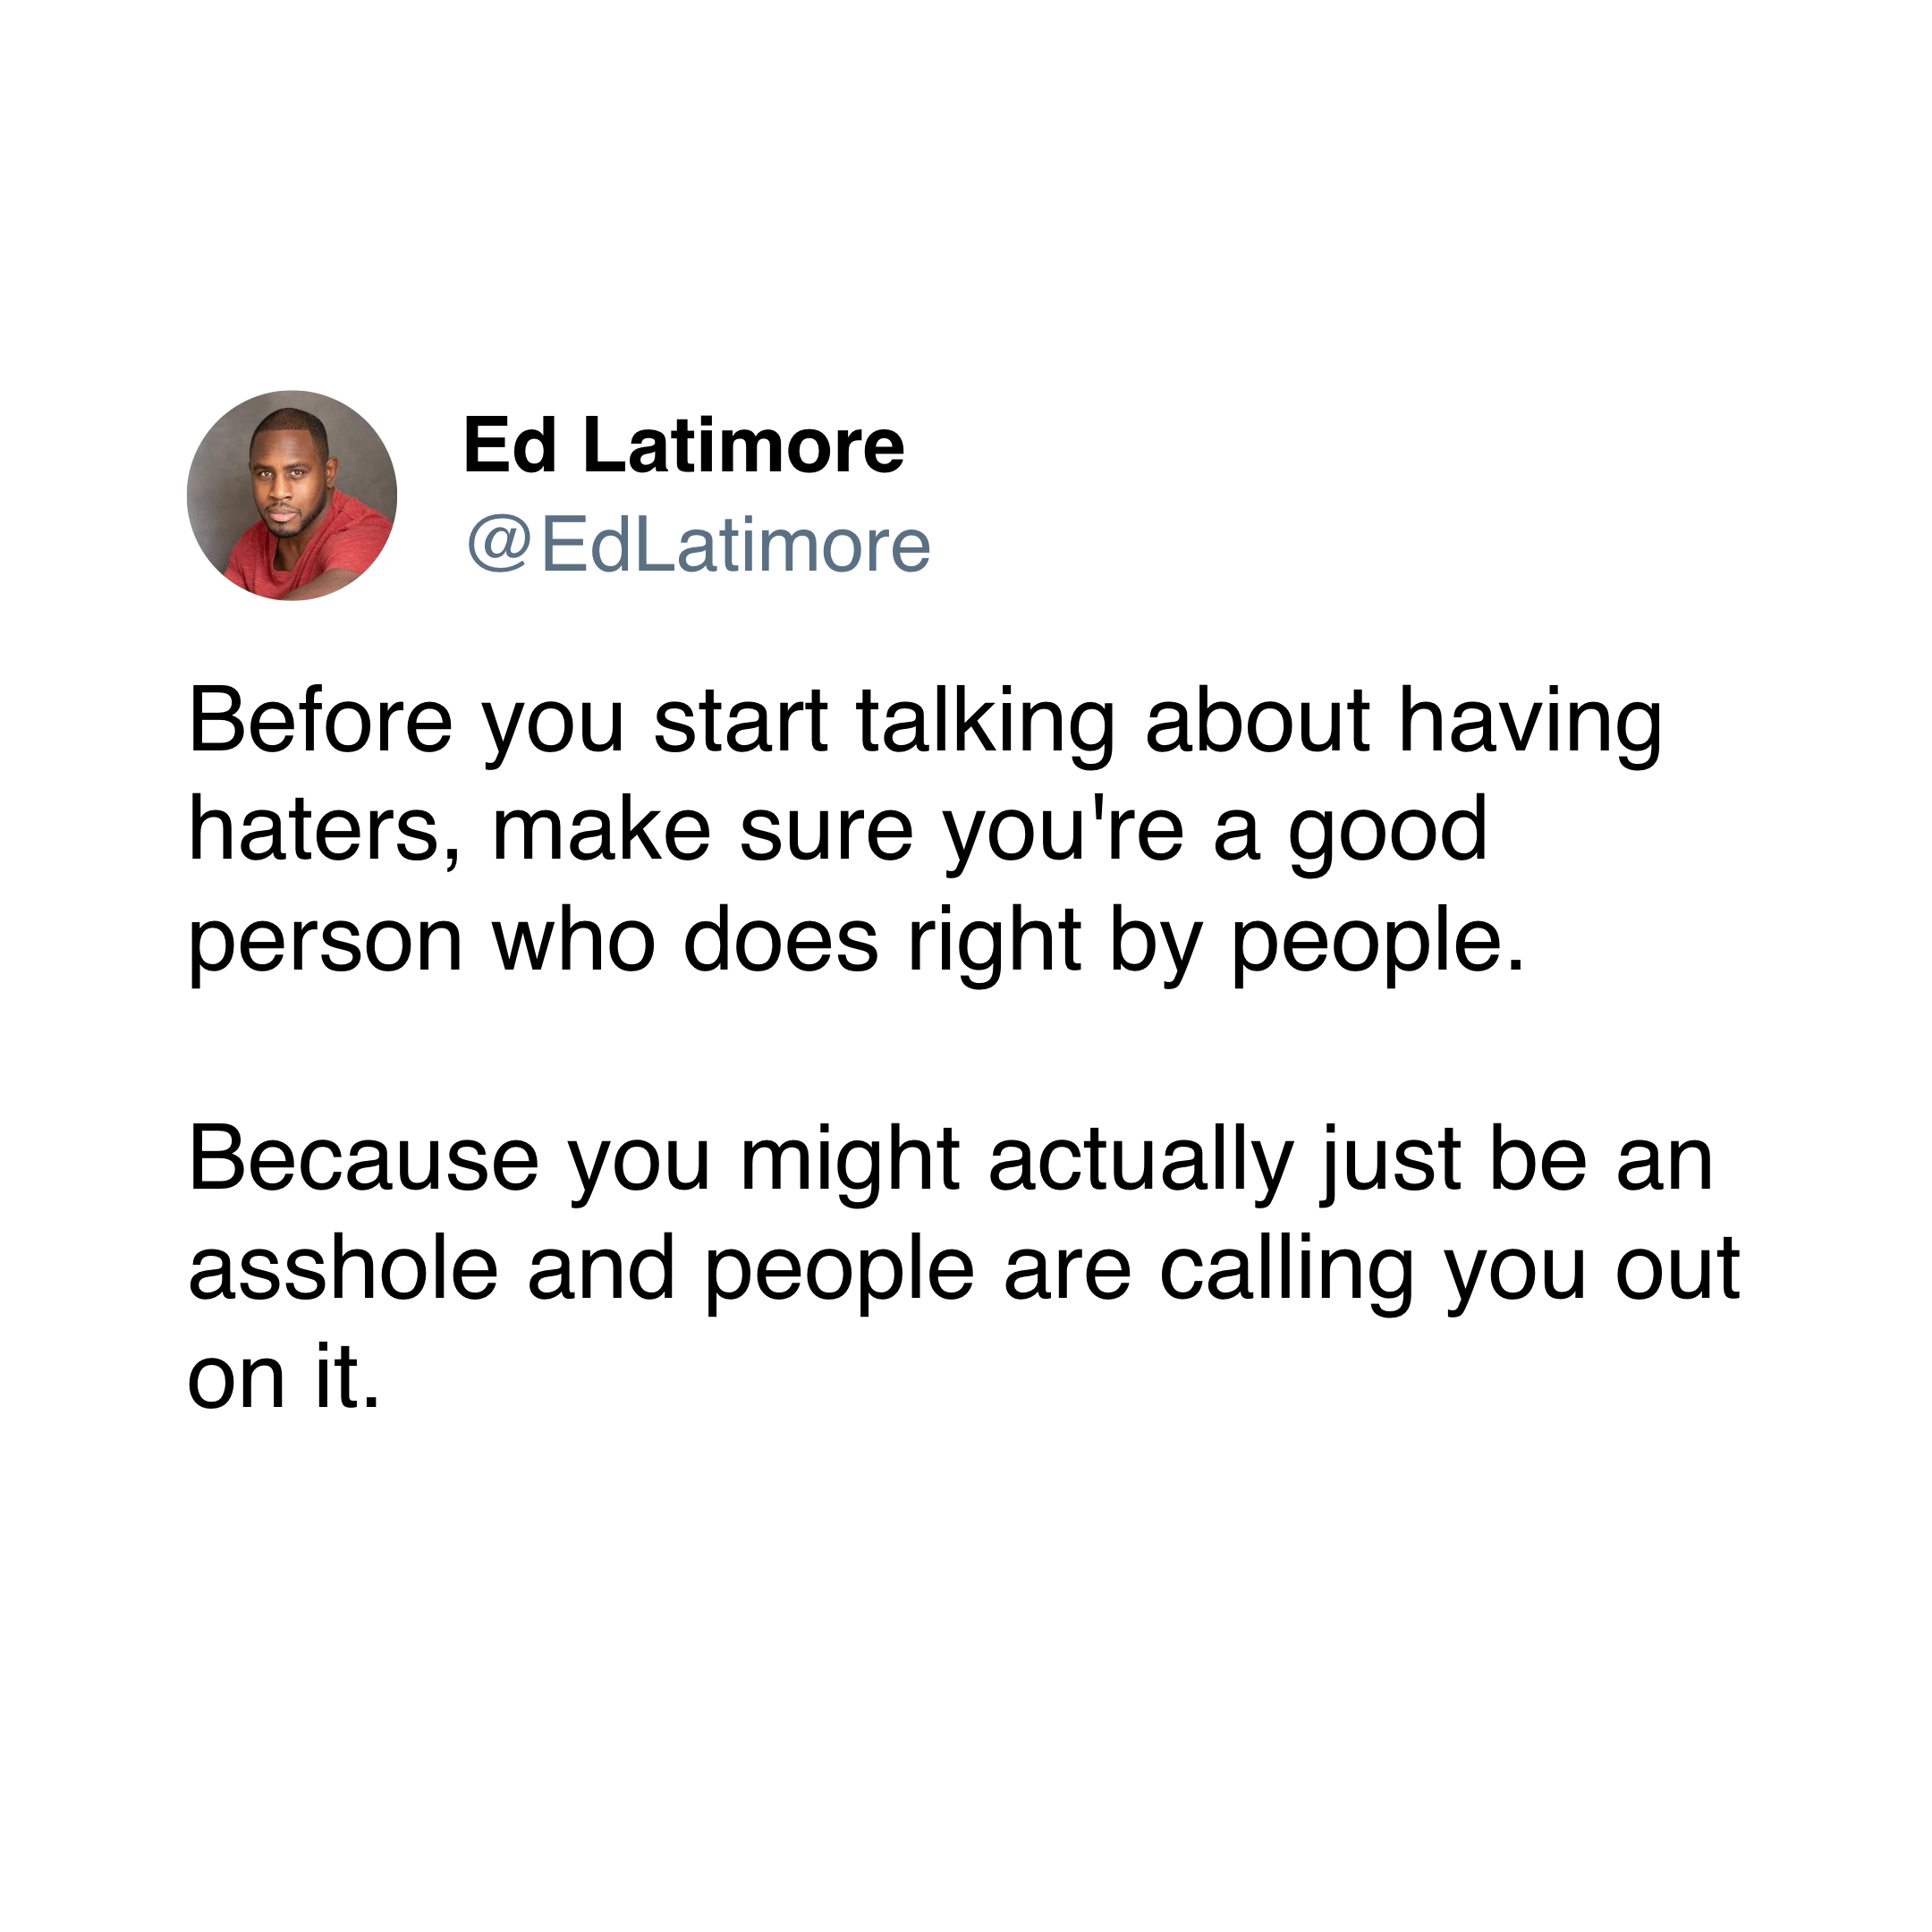 ed latimore hater quotes "might be an asshole"